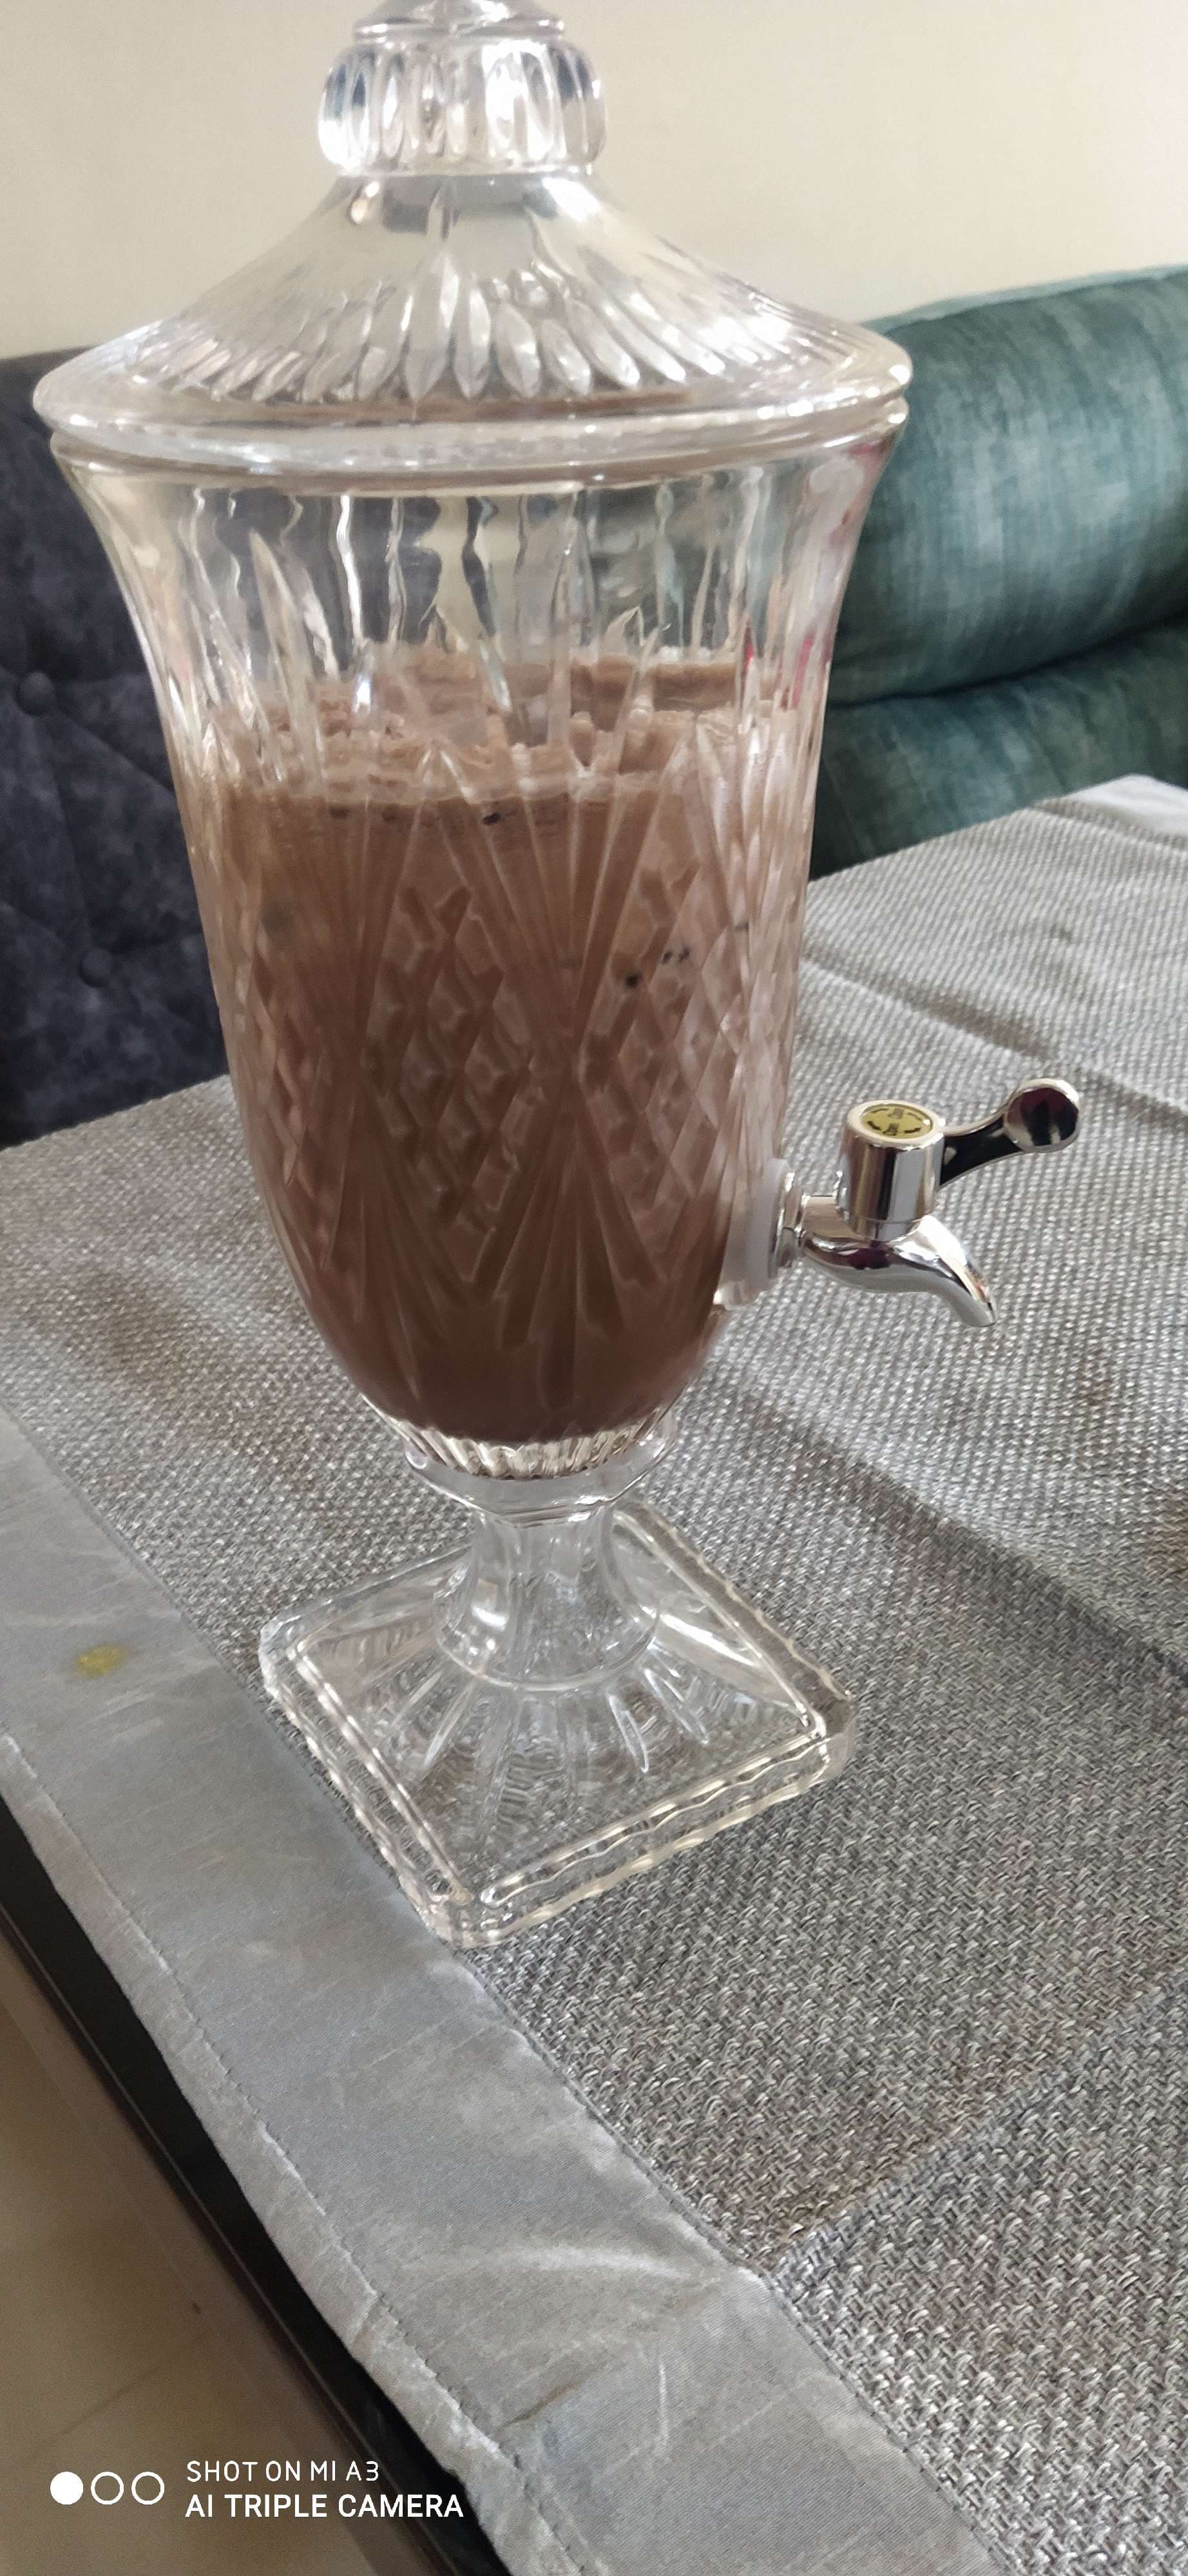 Tasty Chocolate Milkshake cooked by COOX chefs cooks during occasions parties events at home